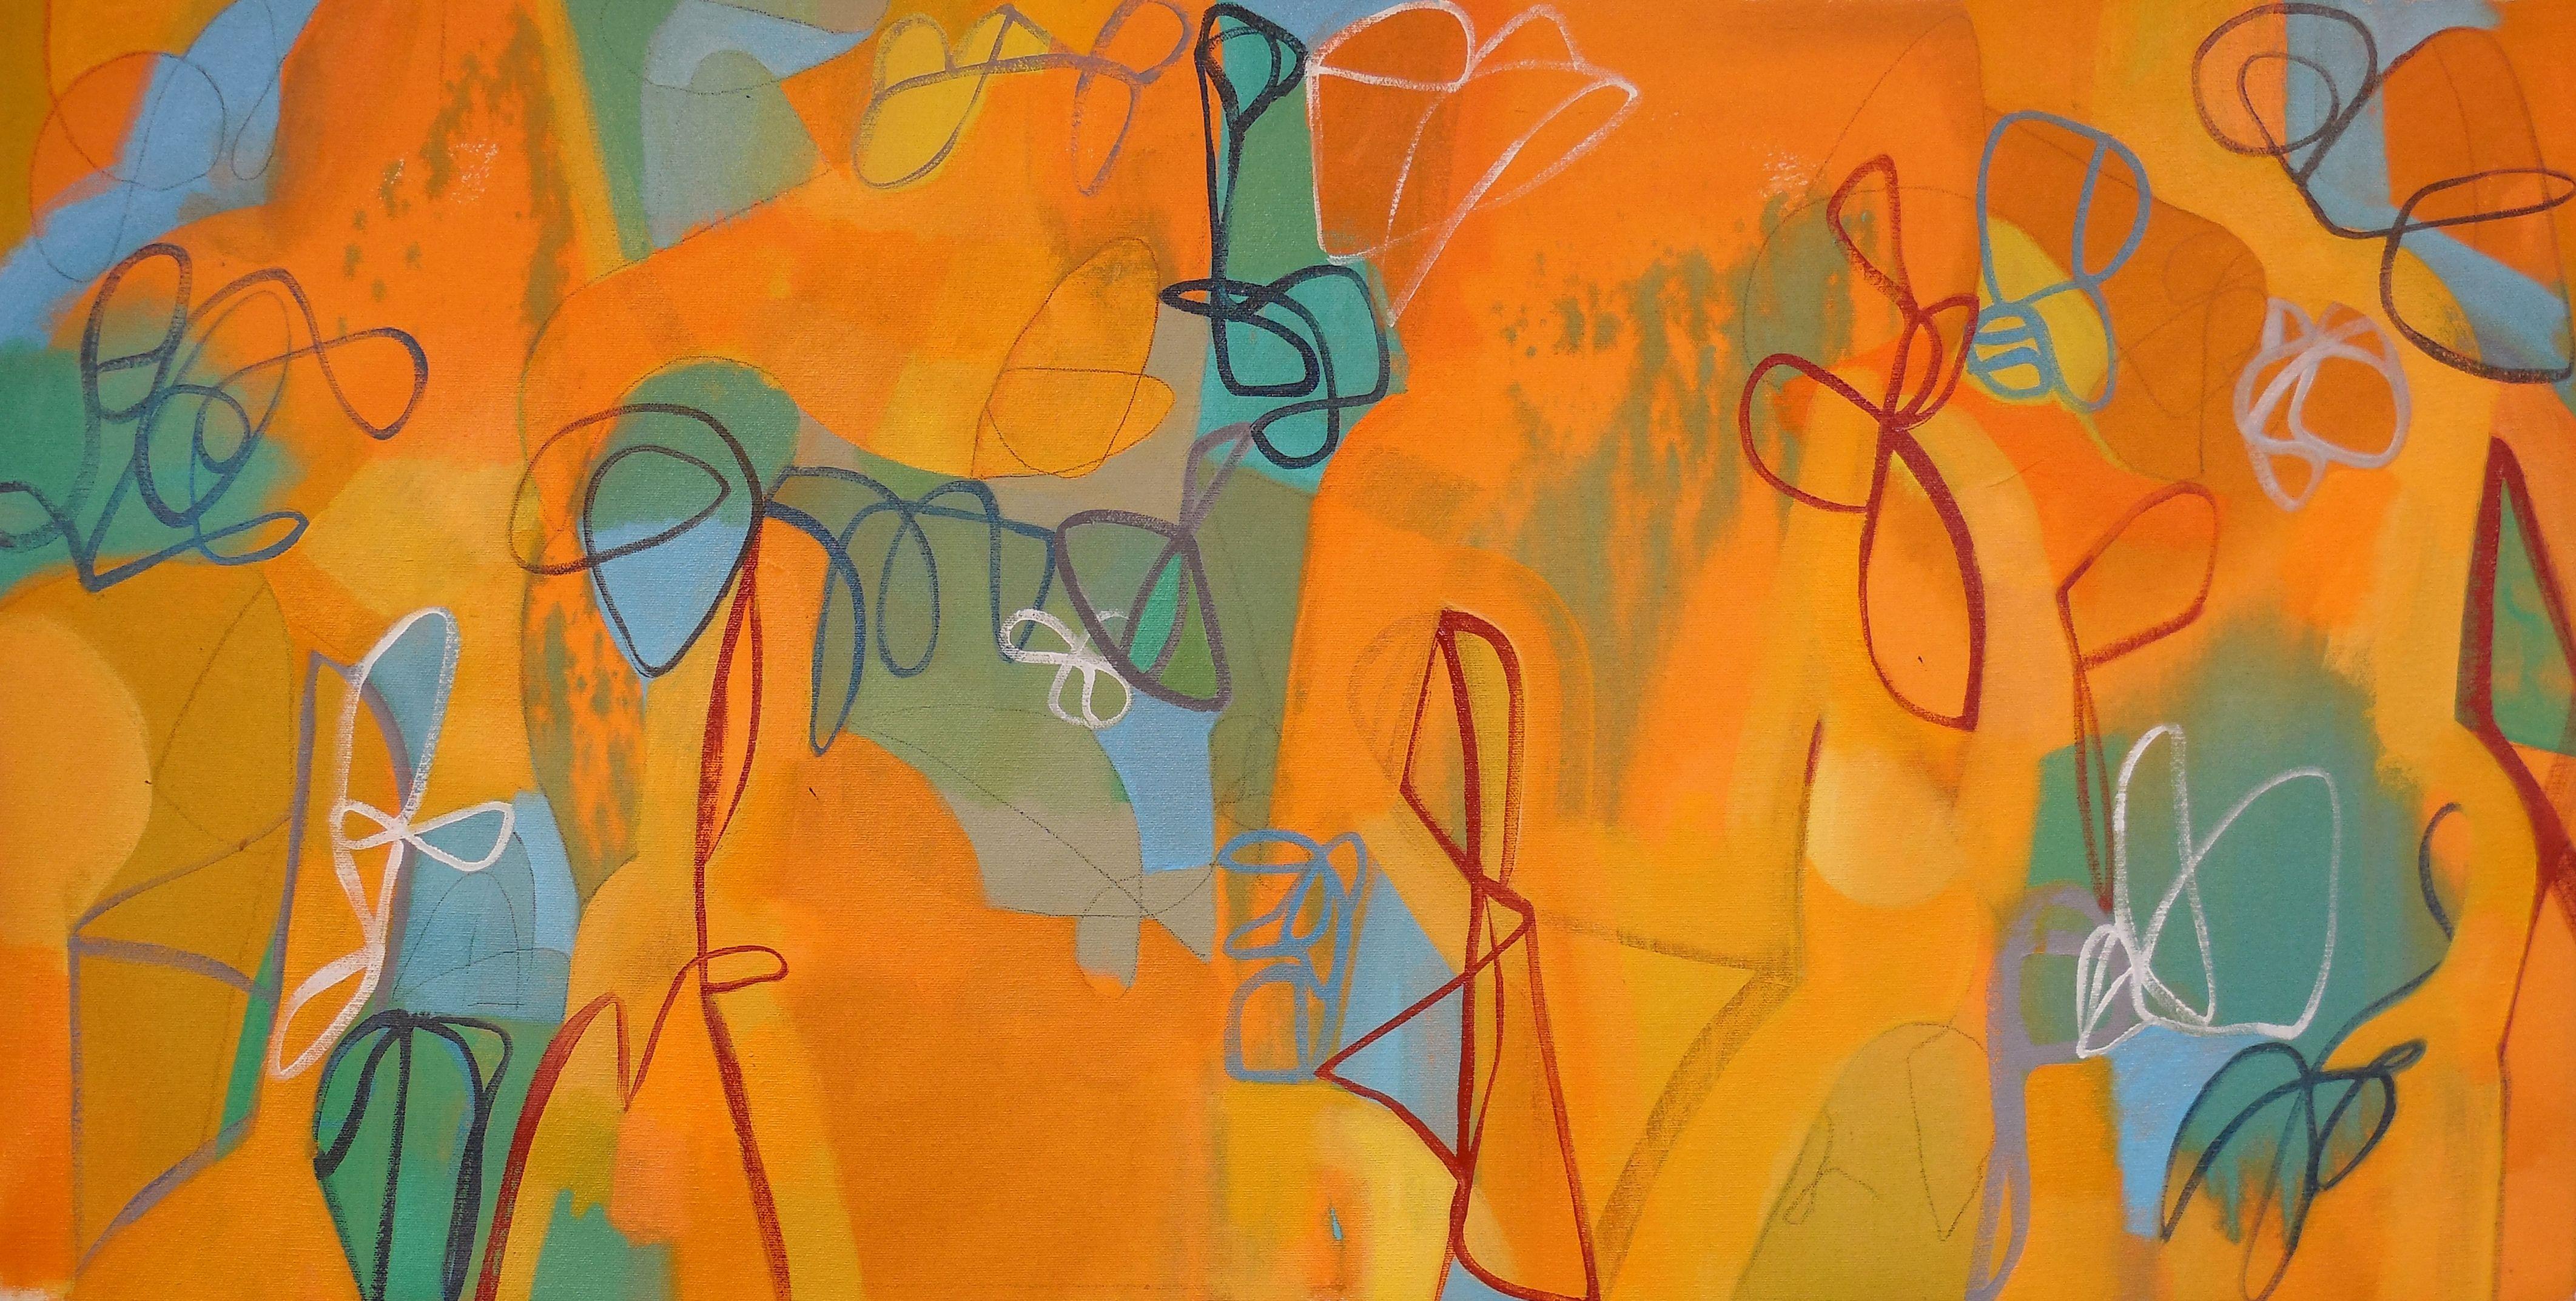 Abstract Painting Hal Mayforth - Hot Spot, Peinture, Acrylique sur Toile